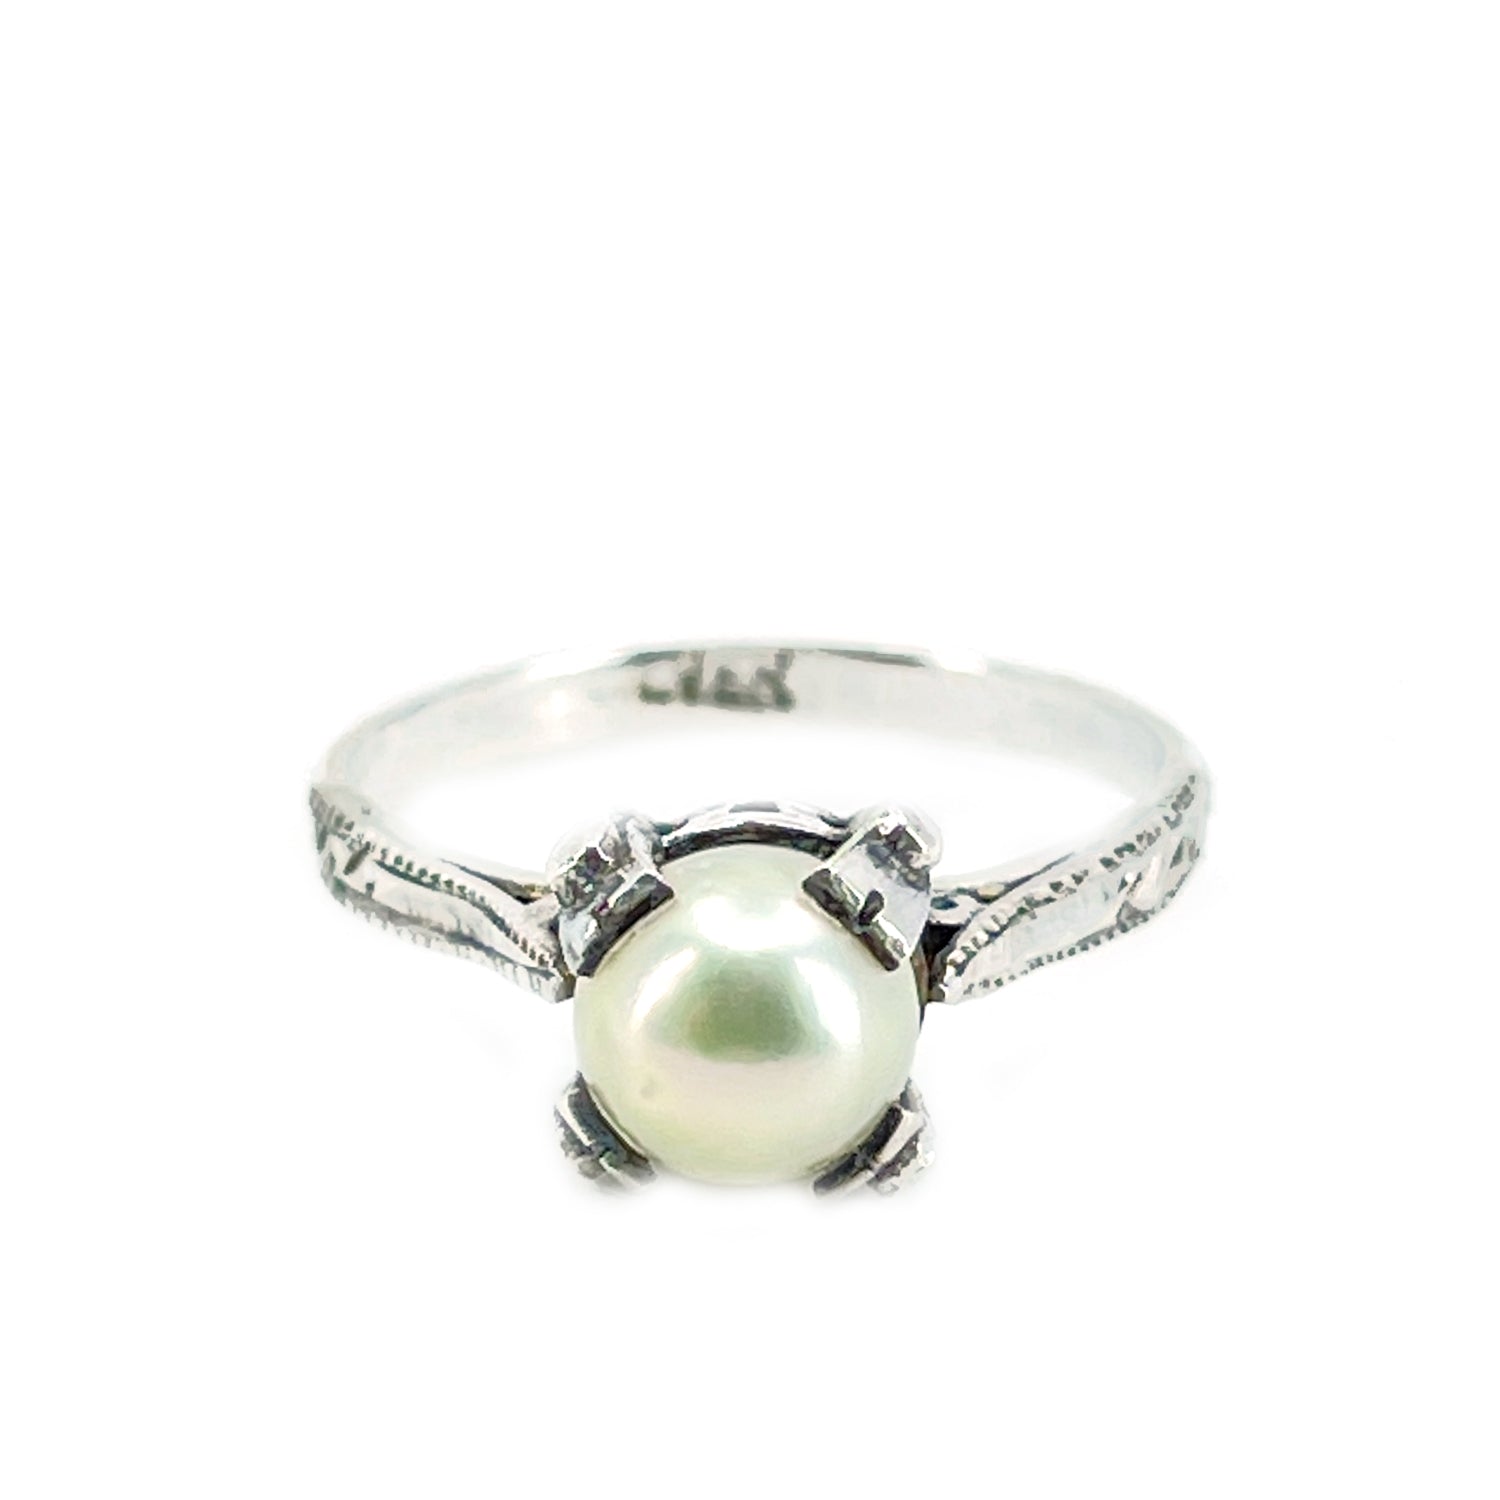 Takashima Art Deco Japanese Saltwater Akoya Cultured Pearl Solitaire Ring- Sterling Silver Sz 5